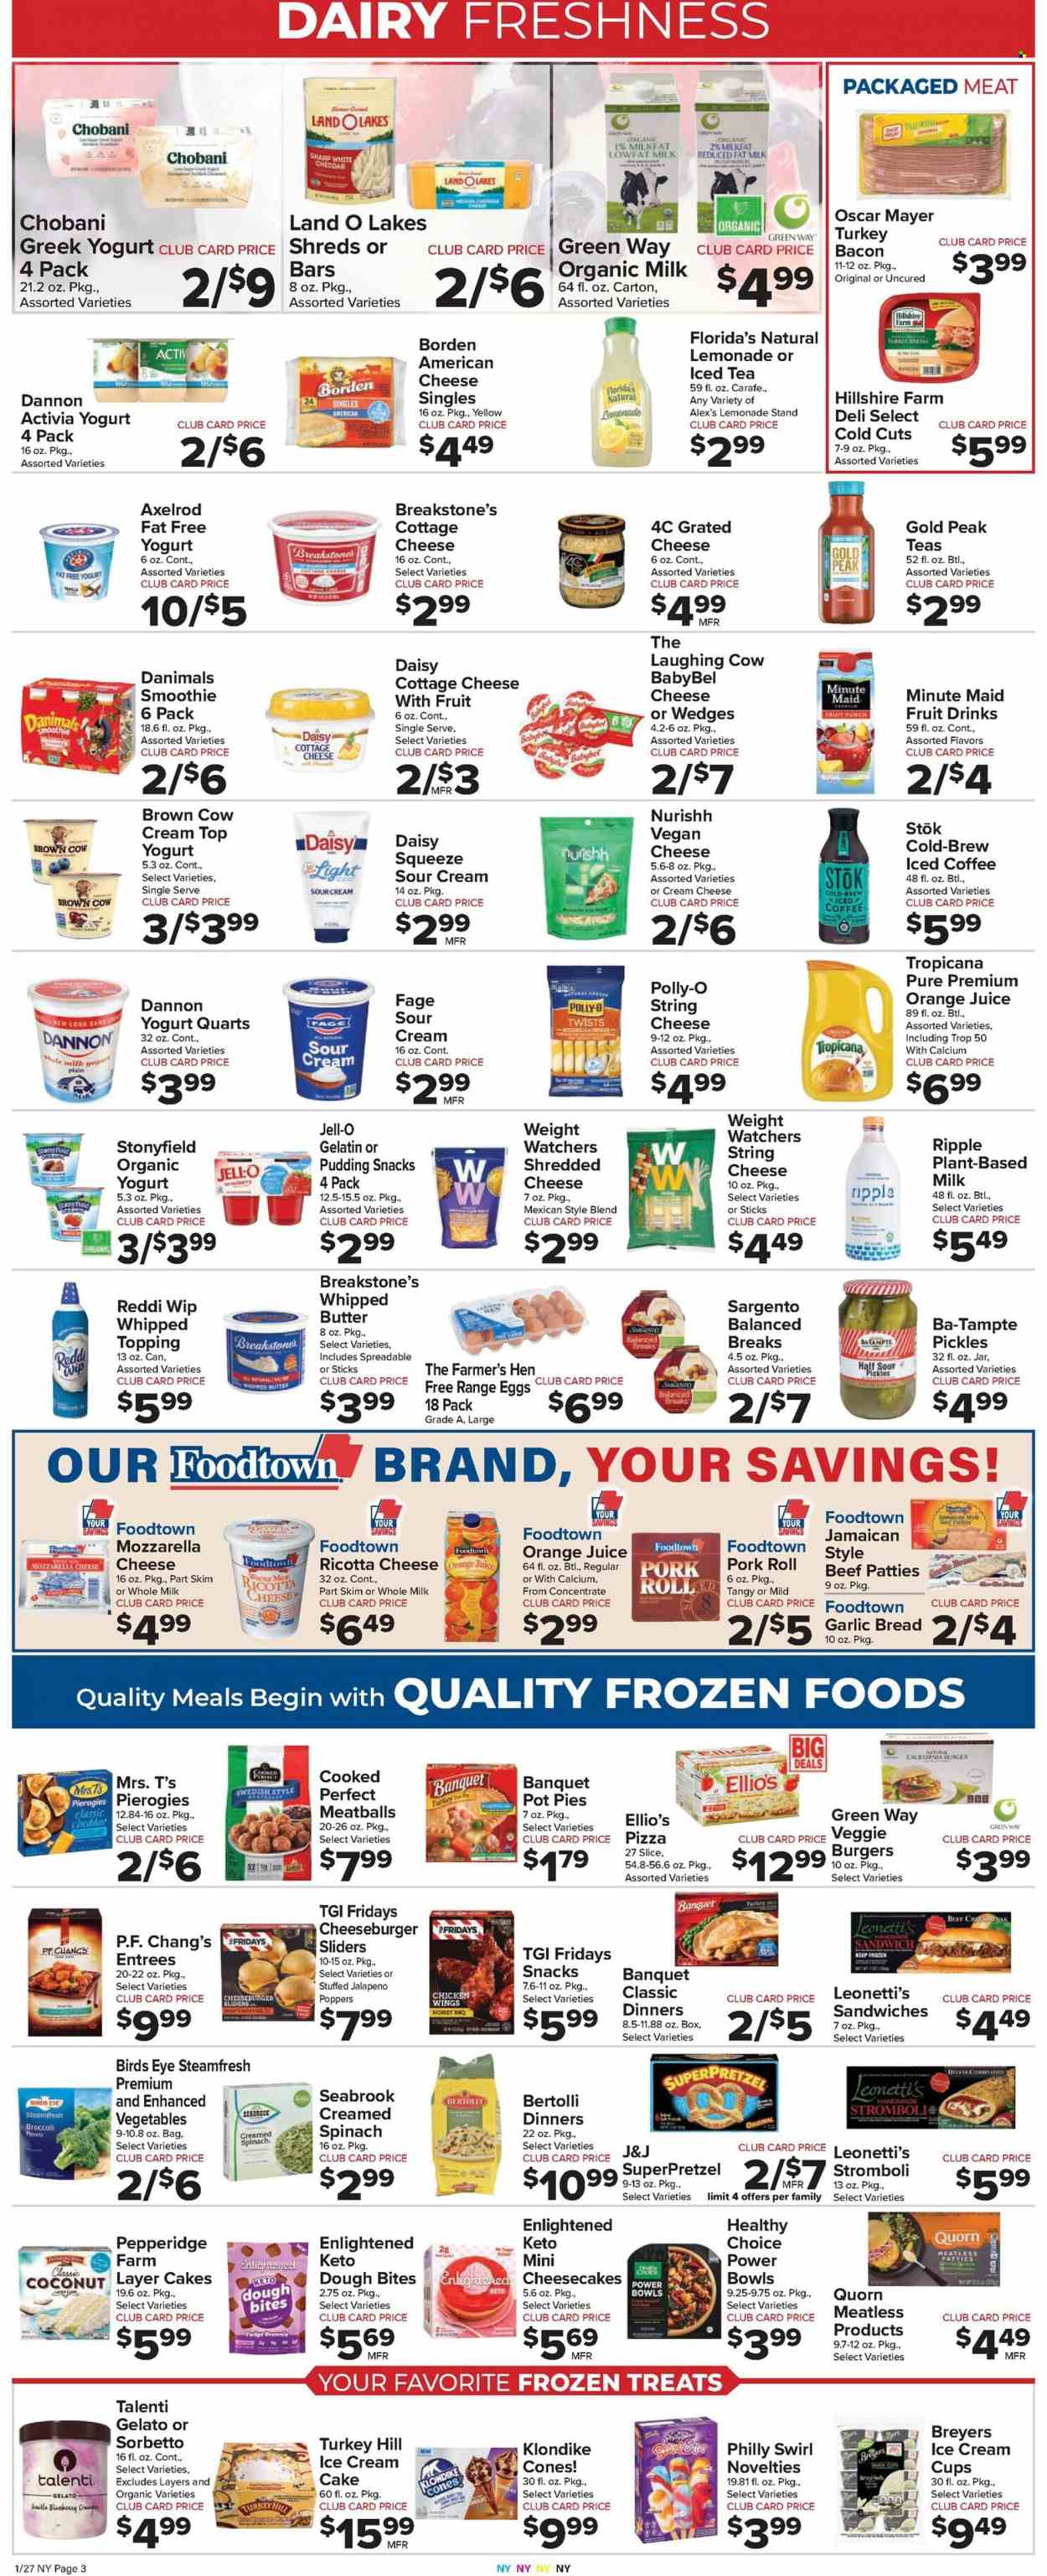 thumbnail - Foodtown Flyer - 01/27/2023 - 02/02/2023 - Sales products - bread, cake, pot pie, brownies, broccoli, jalapeño, coconut, cod, pizza, meatballs, sandwich, cheeseburger, Bird's Eye, veggie burger, Healthy Choice, Bertolli, bacon, turkey bacon, Hillshire Farm, Oscar Mayer, american cheese, cottage cheese, ricotta, string cheese, cheddar, The Laughing Cow, grated cheese, Babybel, Sargento, greek yoghurt, pudding, yoghurt, organic yoghurt, Activia, Chobani, Dannon, Danimals, organic milk, eggs, whipped butter, sour cream, ice cream, Talenti Gelato, Enlightened lce Cream, gelato, chicken wings, SuperPretzel, fudge, snack, Florida's Natural, topping, Jell-O, pickles, honey, lemonade, orange juice, juice, ice tea, fruit punch, smoothie, iced coffee, cup, Sharp, calcium. Page 3.